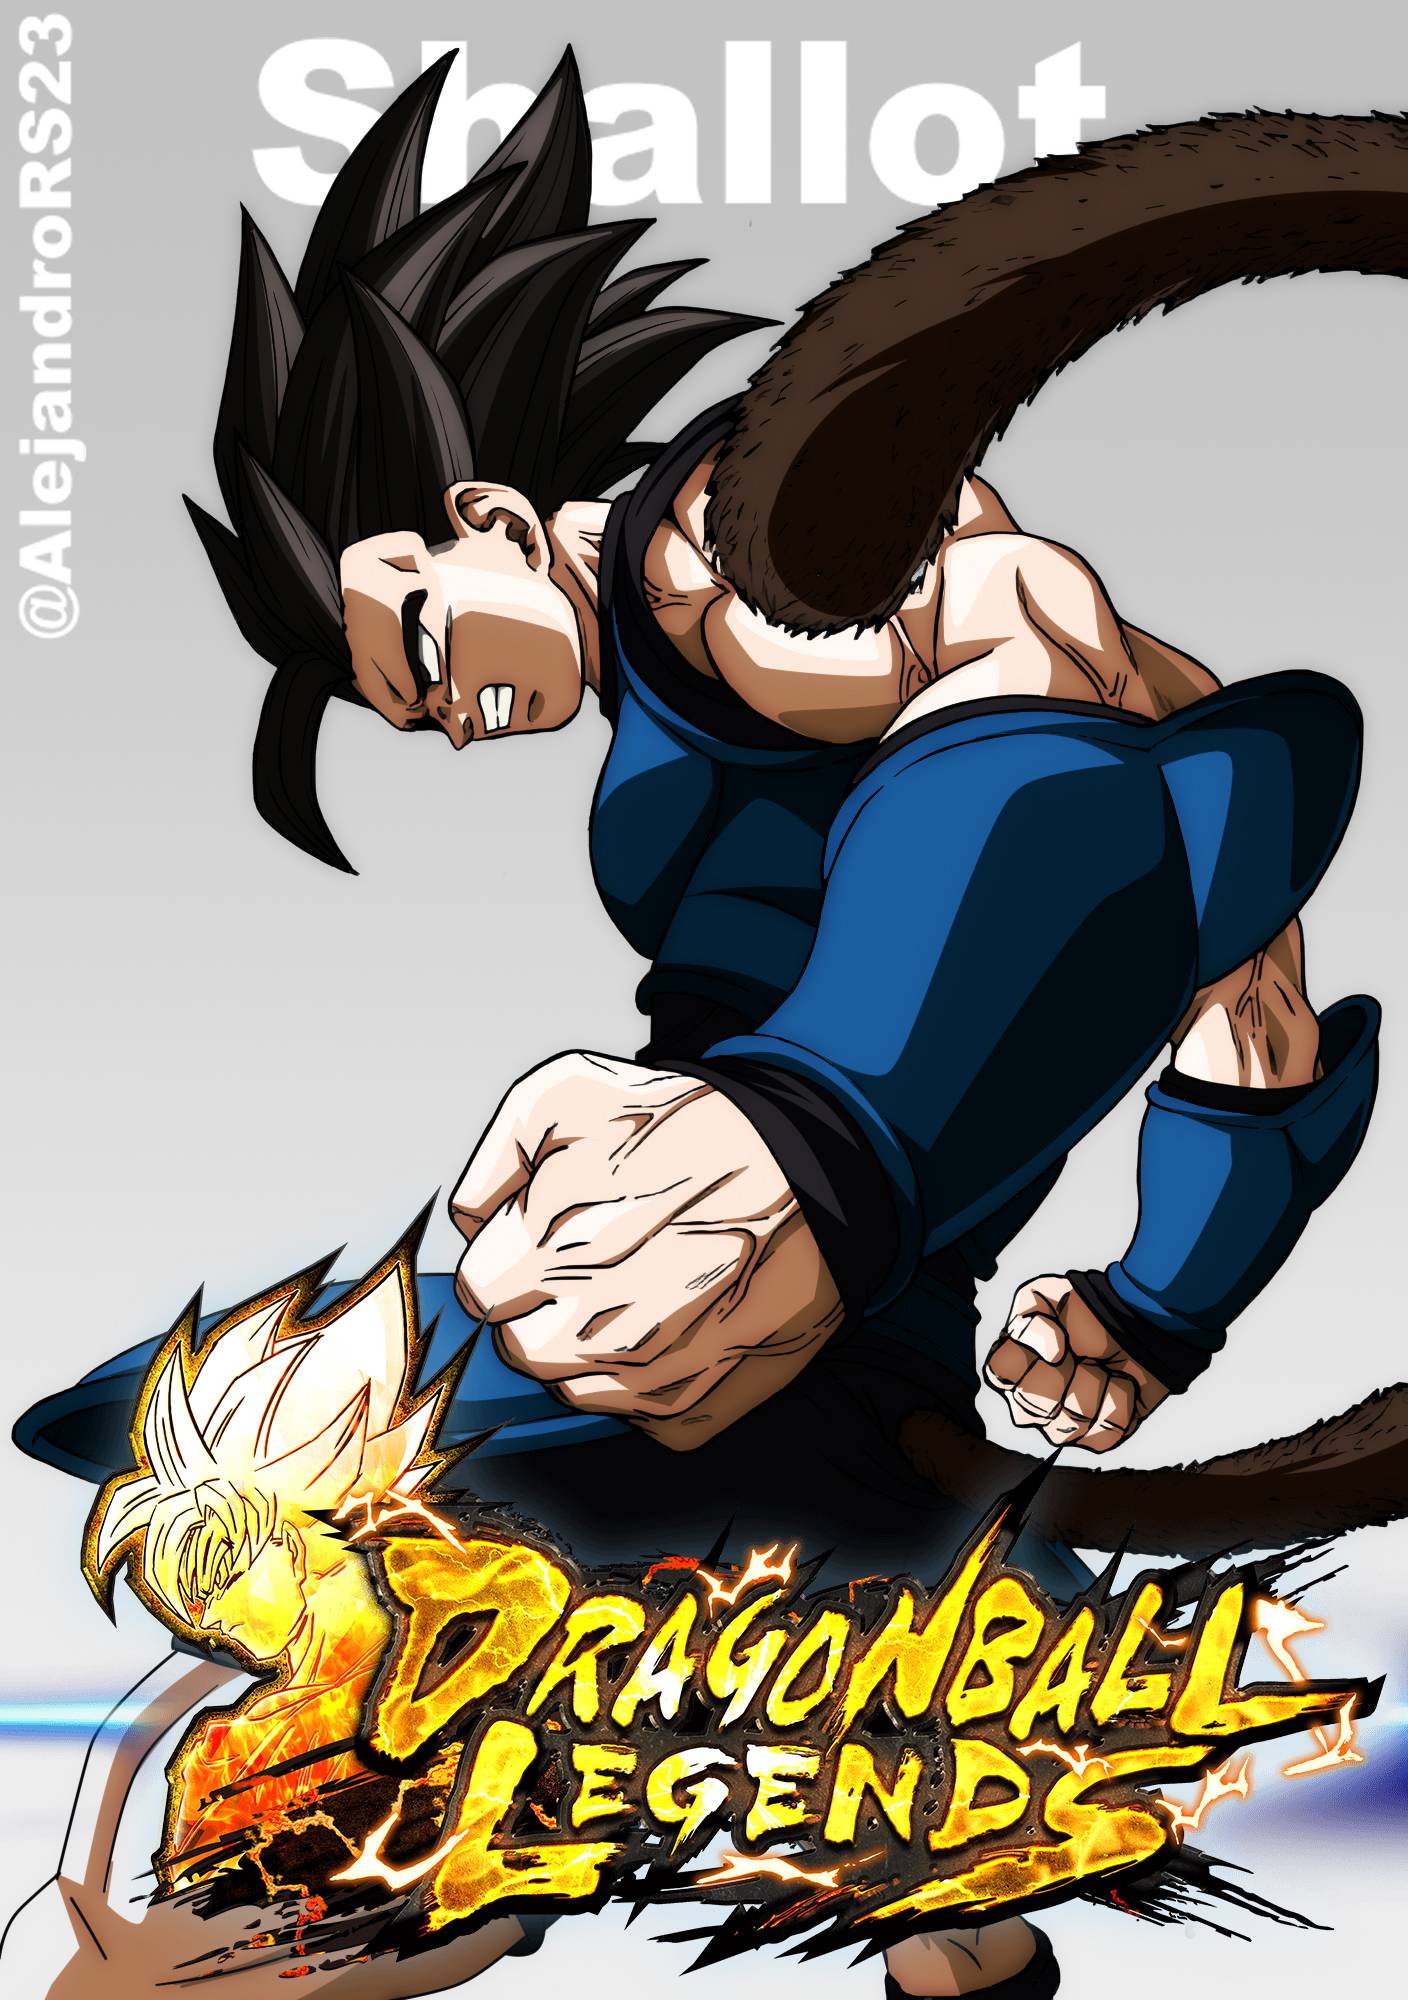 shallot (dragon ball and 1 more) drawn by zero-go